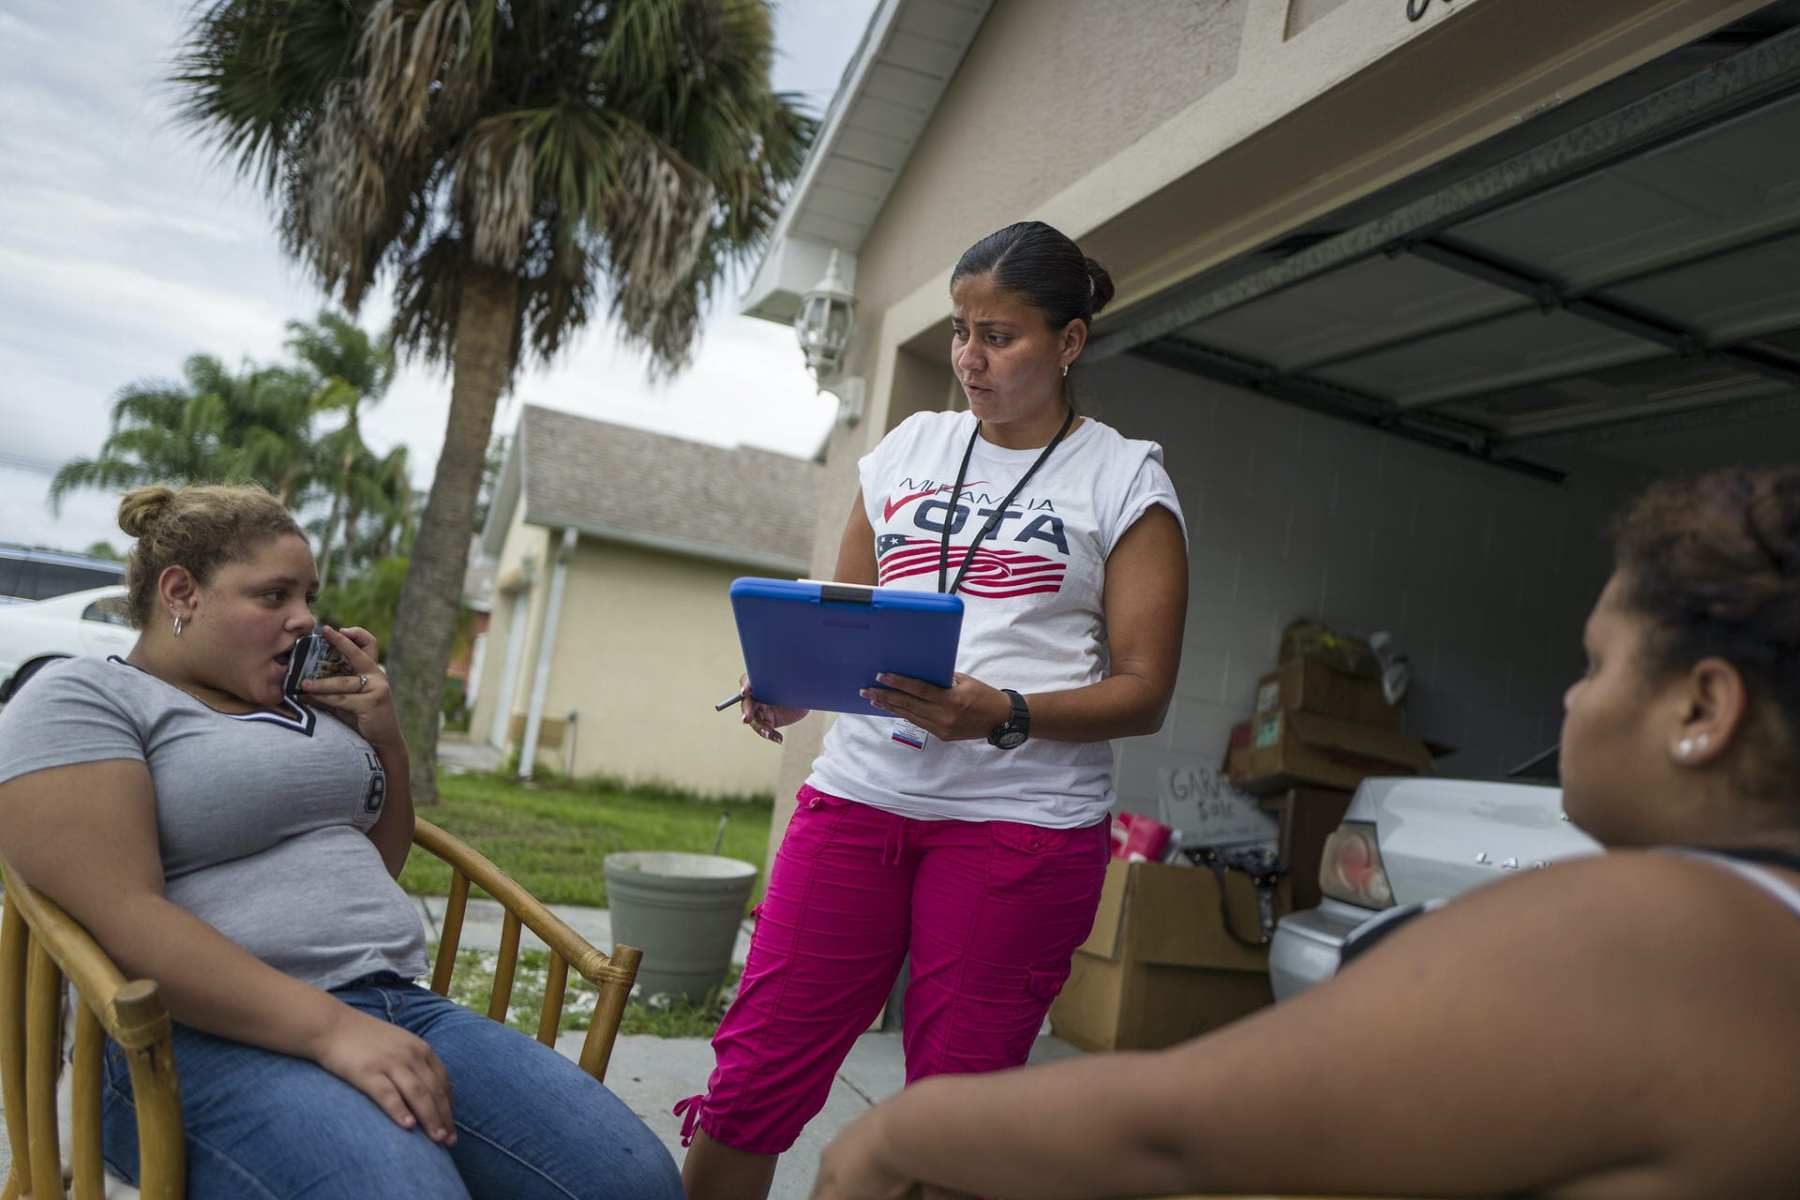 Soraya Marquez, the state coordinator for Mi Familia Vota and her crew hit a Puerto Rican neighborhood trying to get Latinos to register to vote in the 2016 presidential election on July 24, 2015 in Kissimmee, FL. Jeamy Ramirez gets a young girl (18) to register to vote in a Puerto Rican neighborhood in Kissimmee. (Photos by Charles Ommanney/The Washington Post via Getty Images)